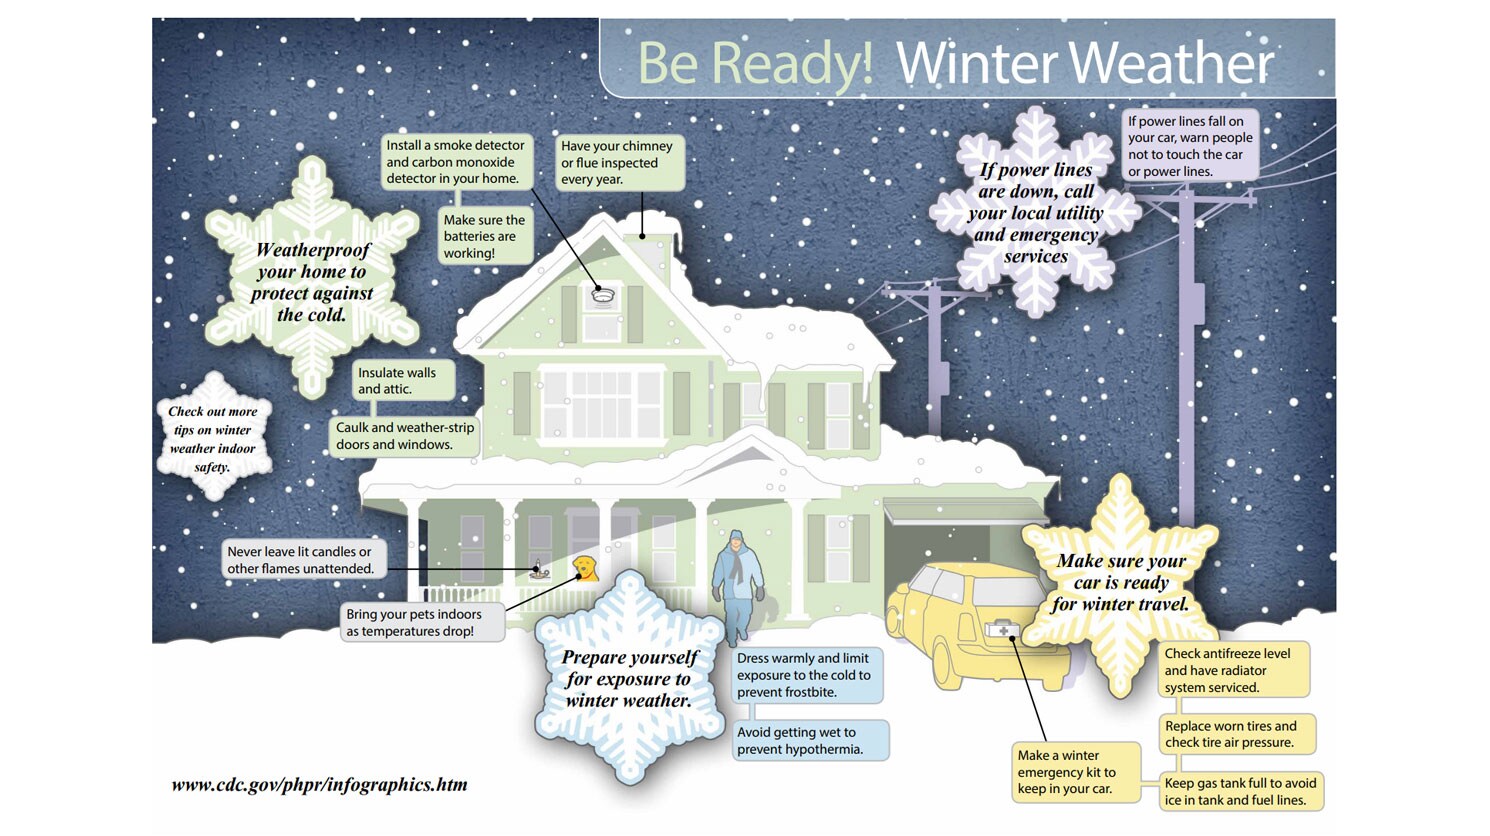 Be ready for winter weather infographic